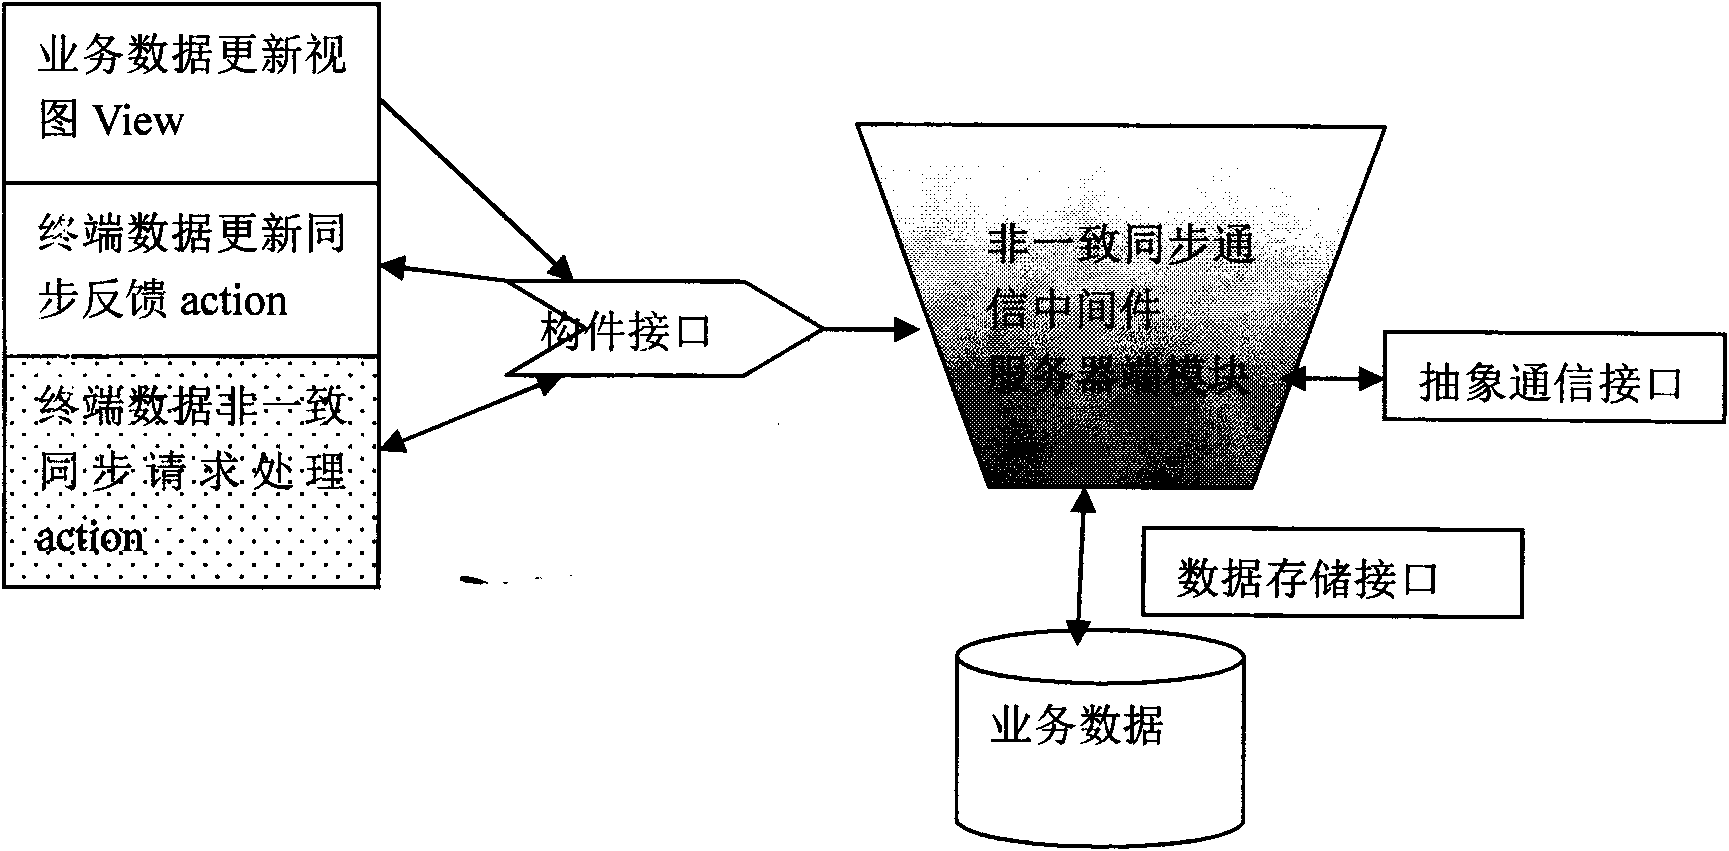 Non-uniform cooperative system and method based on component middleware platforms under network environment